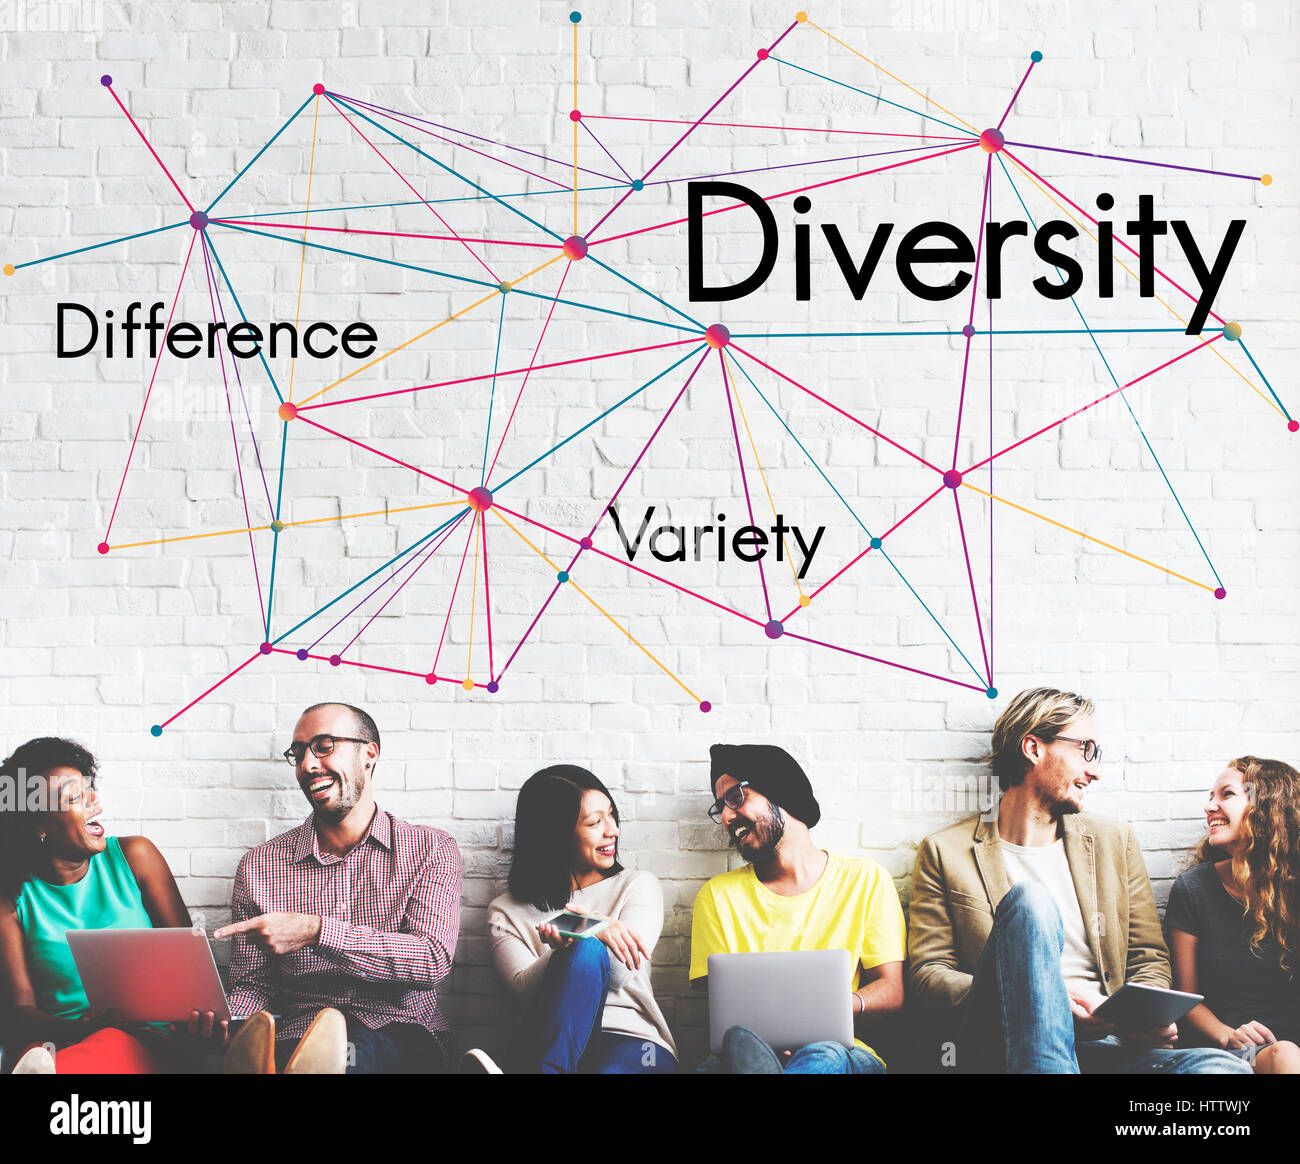 Difference Variety Diversity Teamwork Success Stock Photo